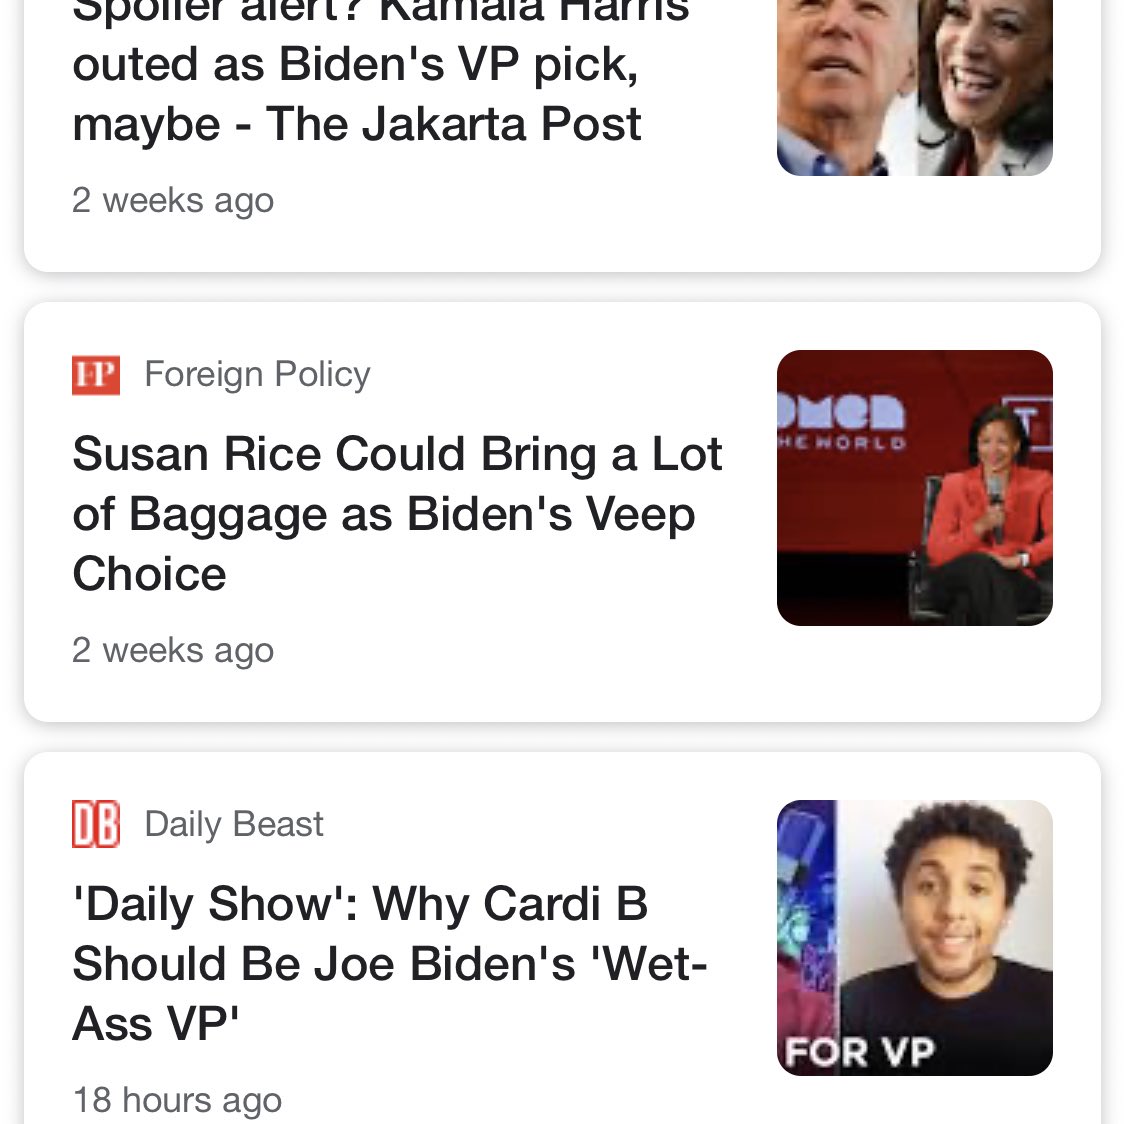 And when it looked like Biden might pick Susan Rice for VP instead of Kamala Harris in the last few weeks, well, Susan Rice racked up her own collection of "baggage" headlines. 7/